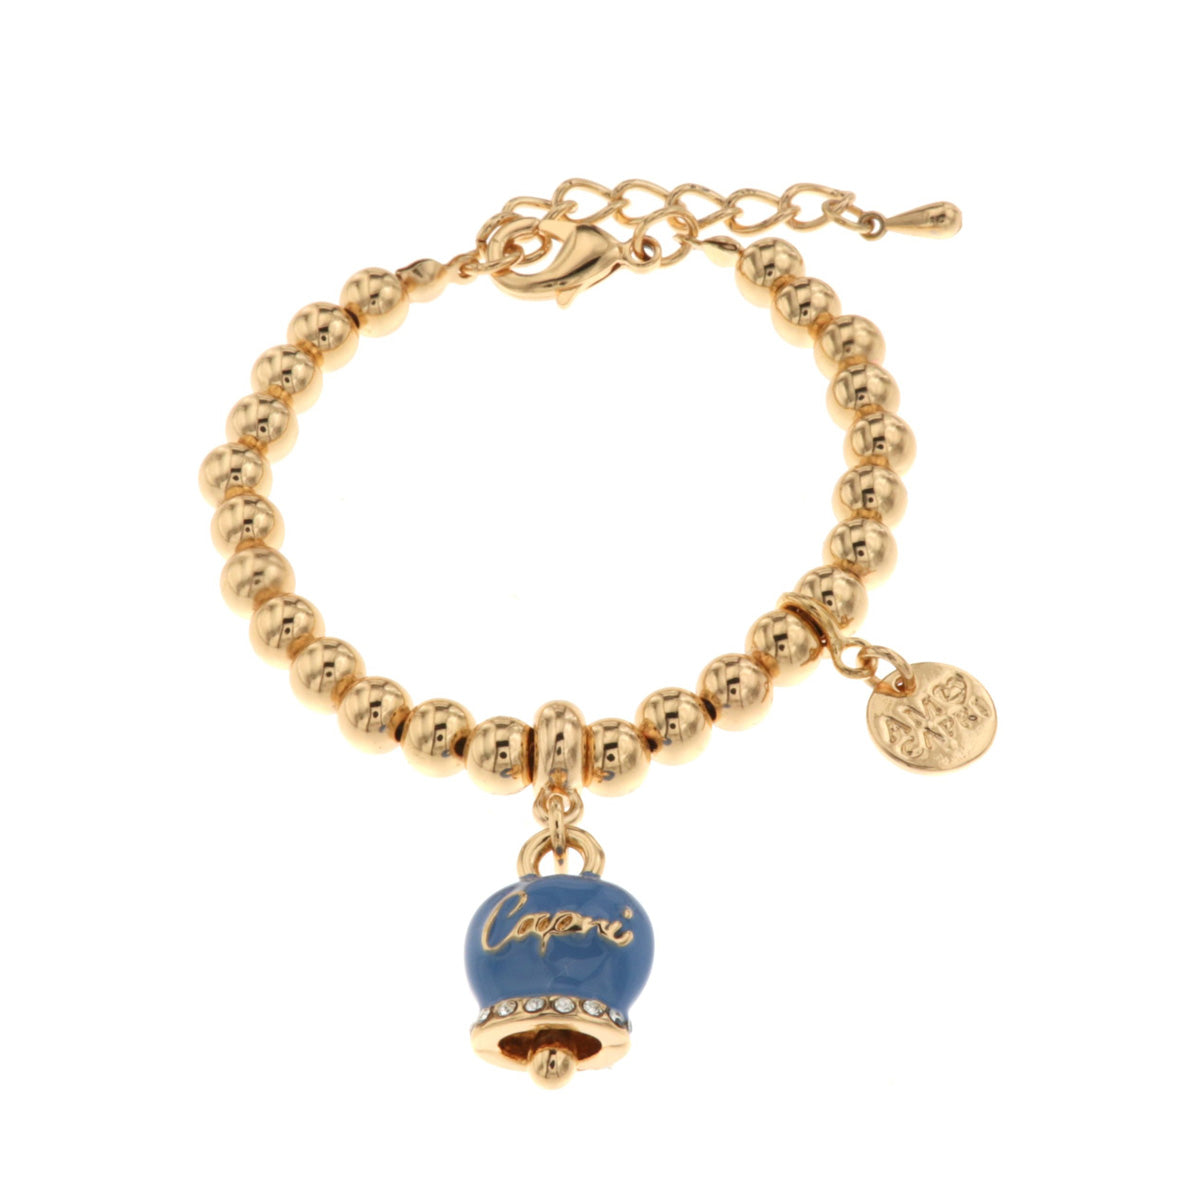 Metal bracelet with cobalt blue charming bell, with capri writing